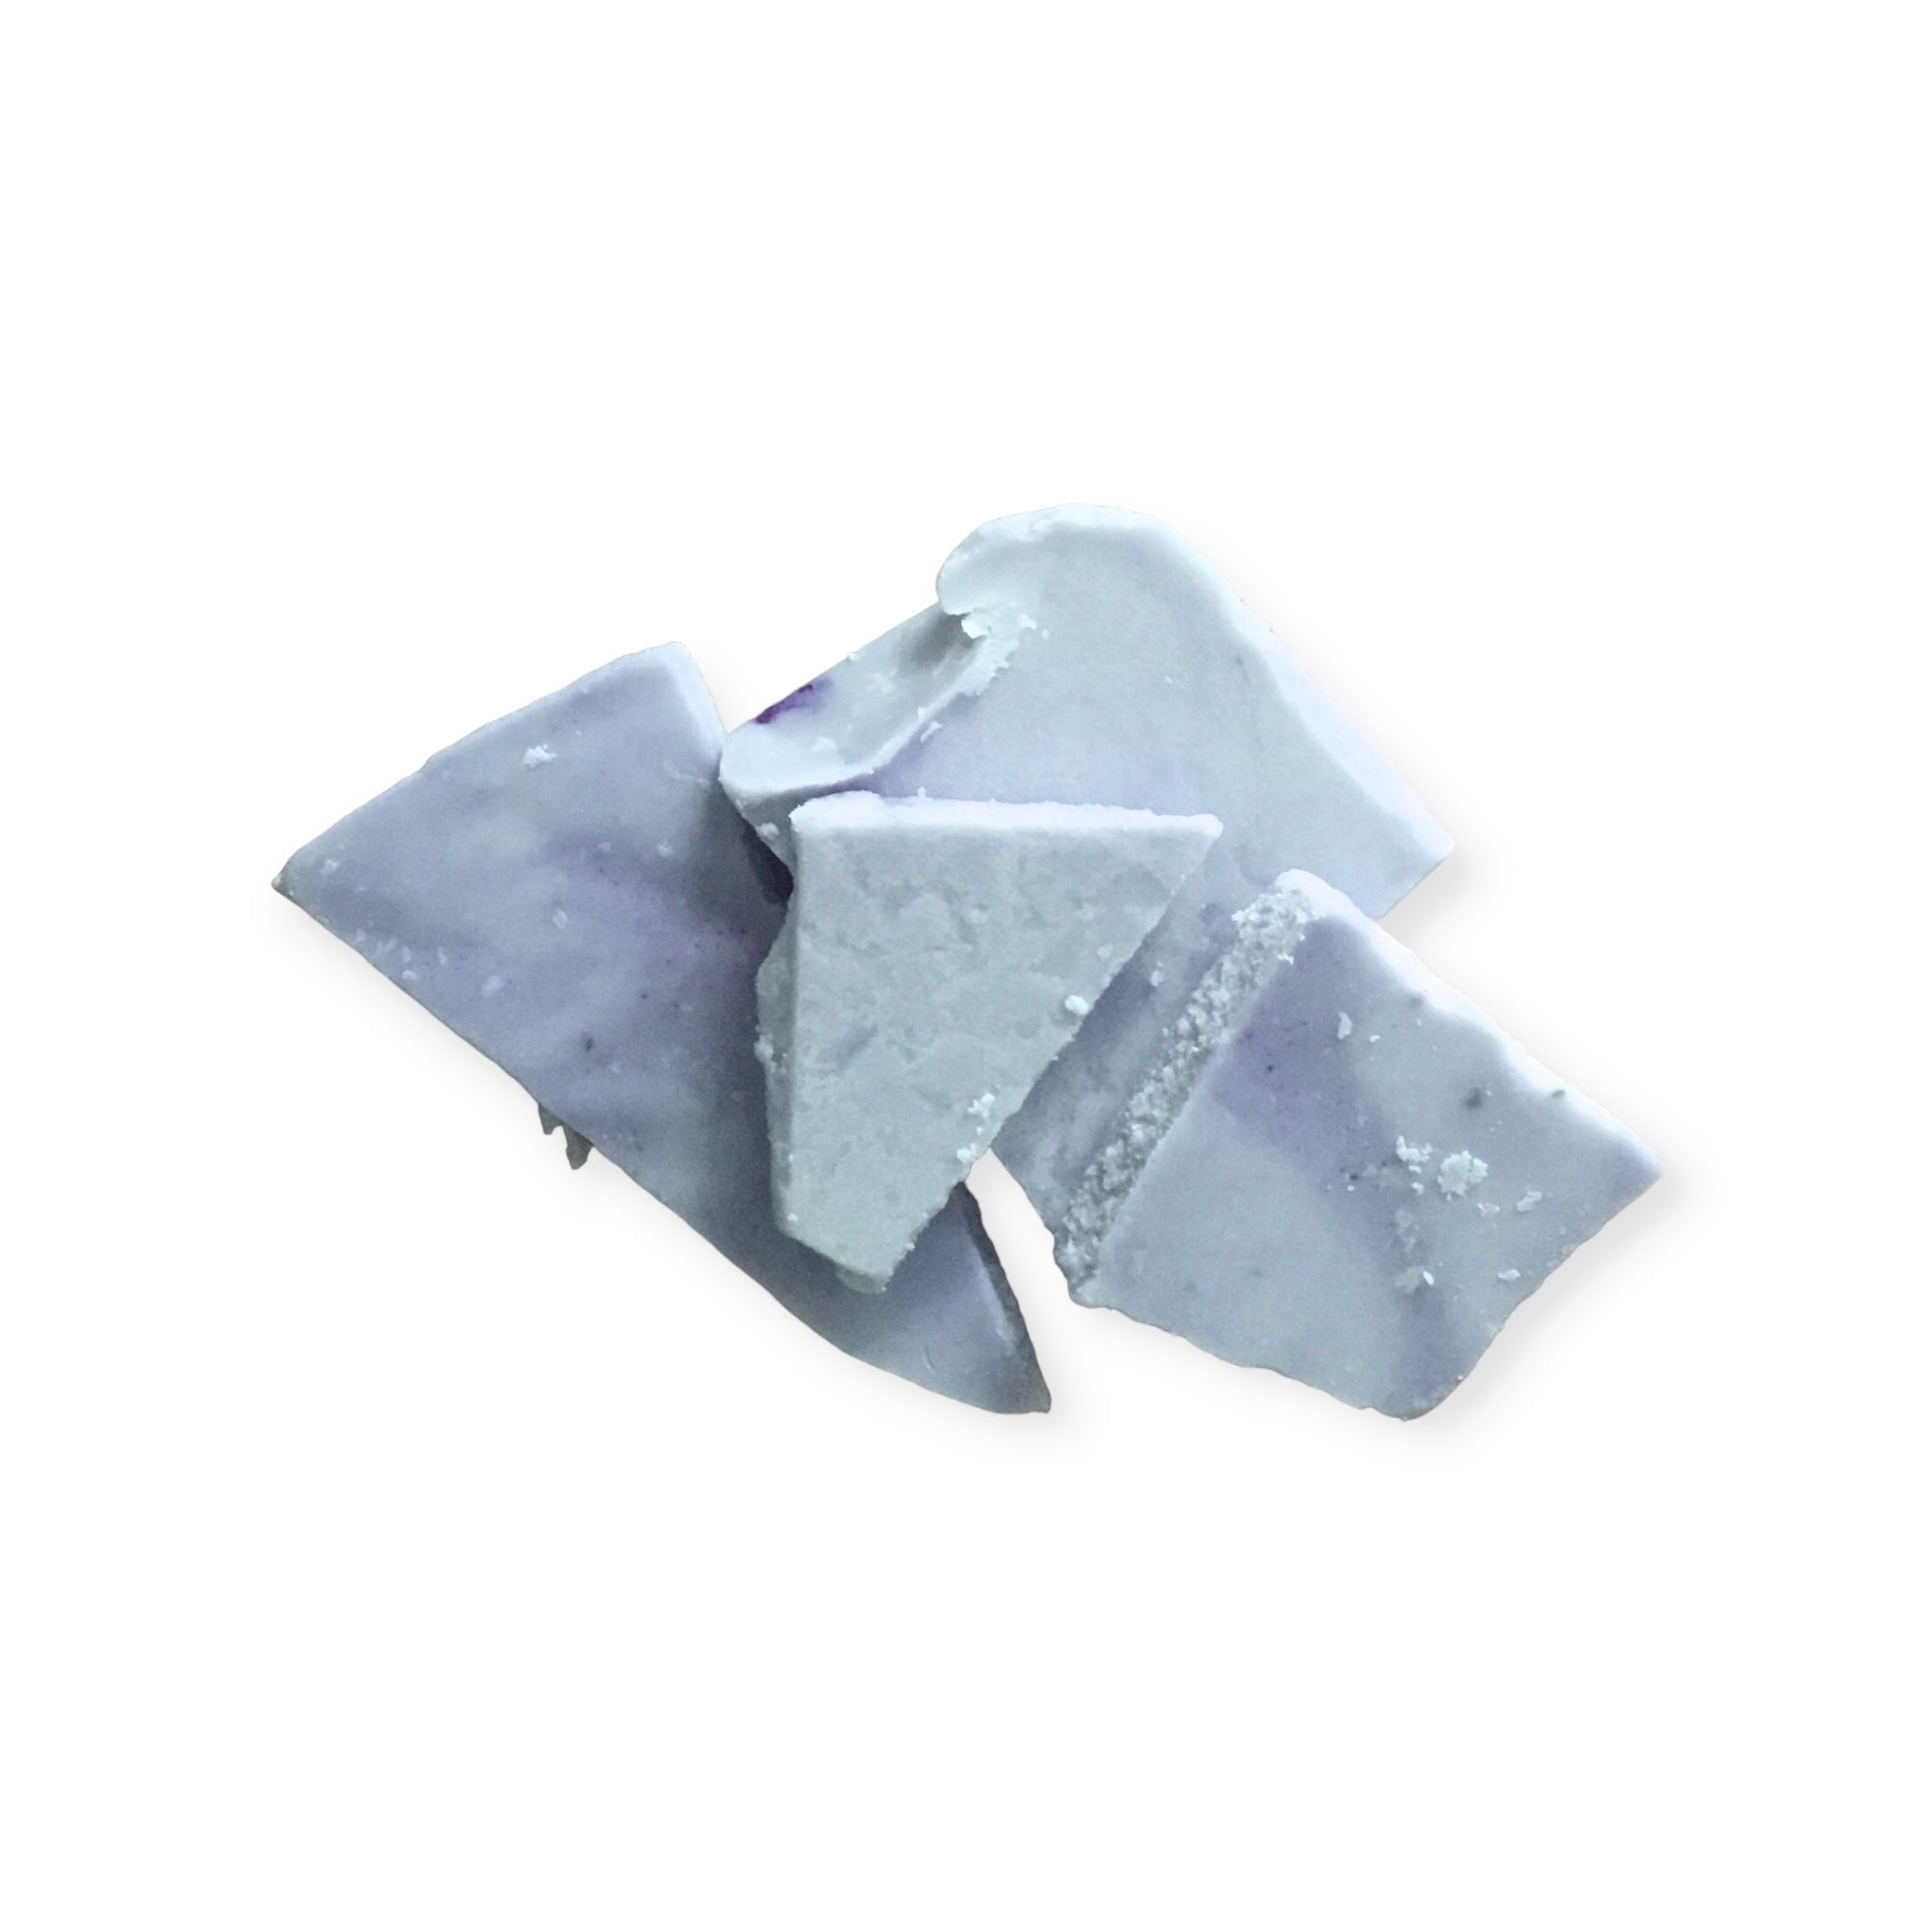 Pale blue soy wax melts in bark form on a white background